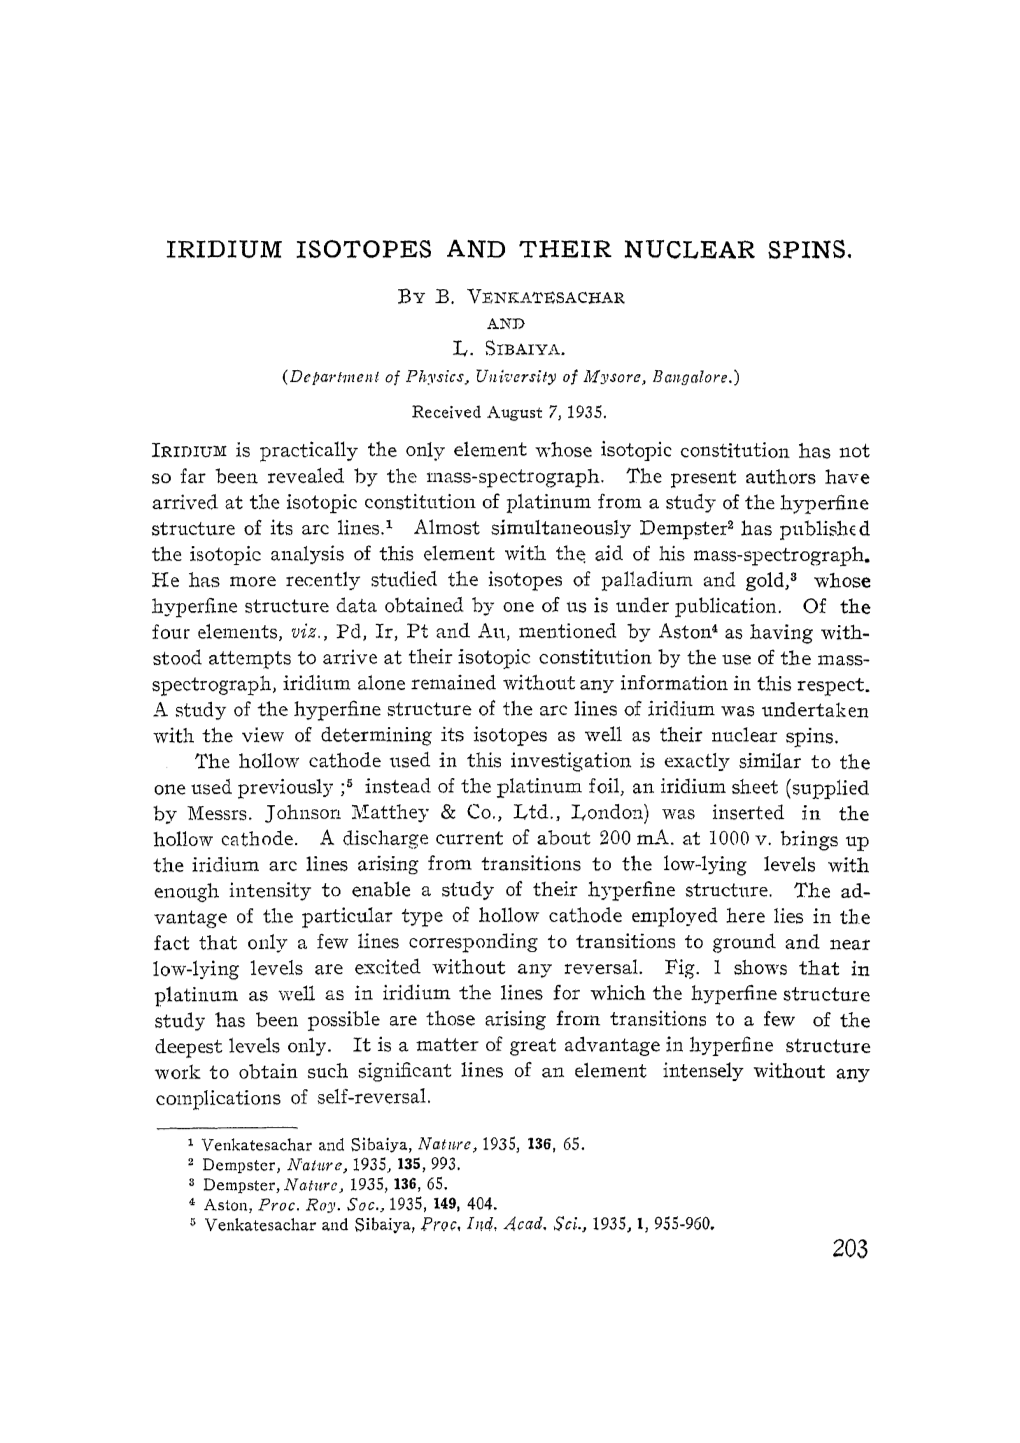 Iridium Isotopes and Their Nuclear Spins